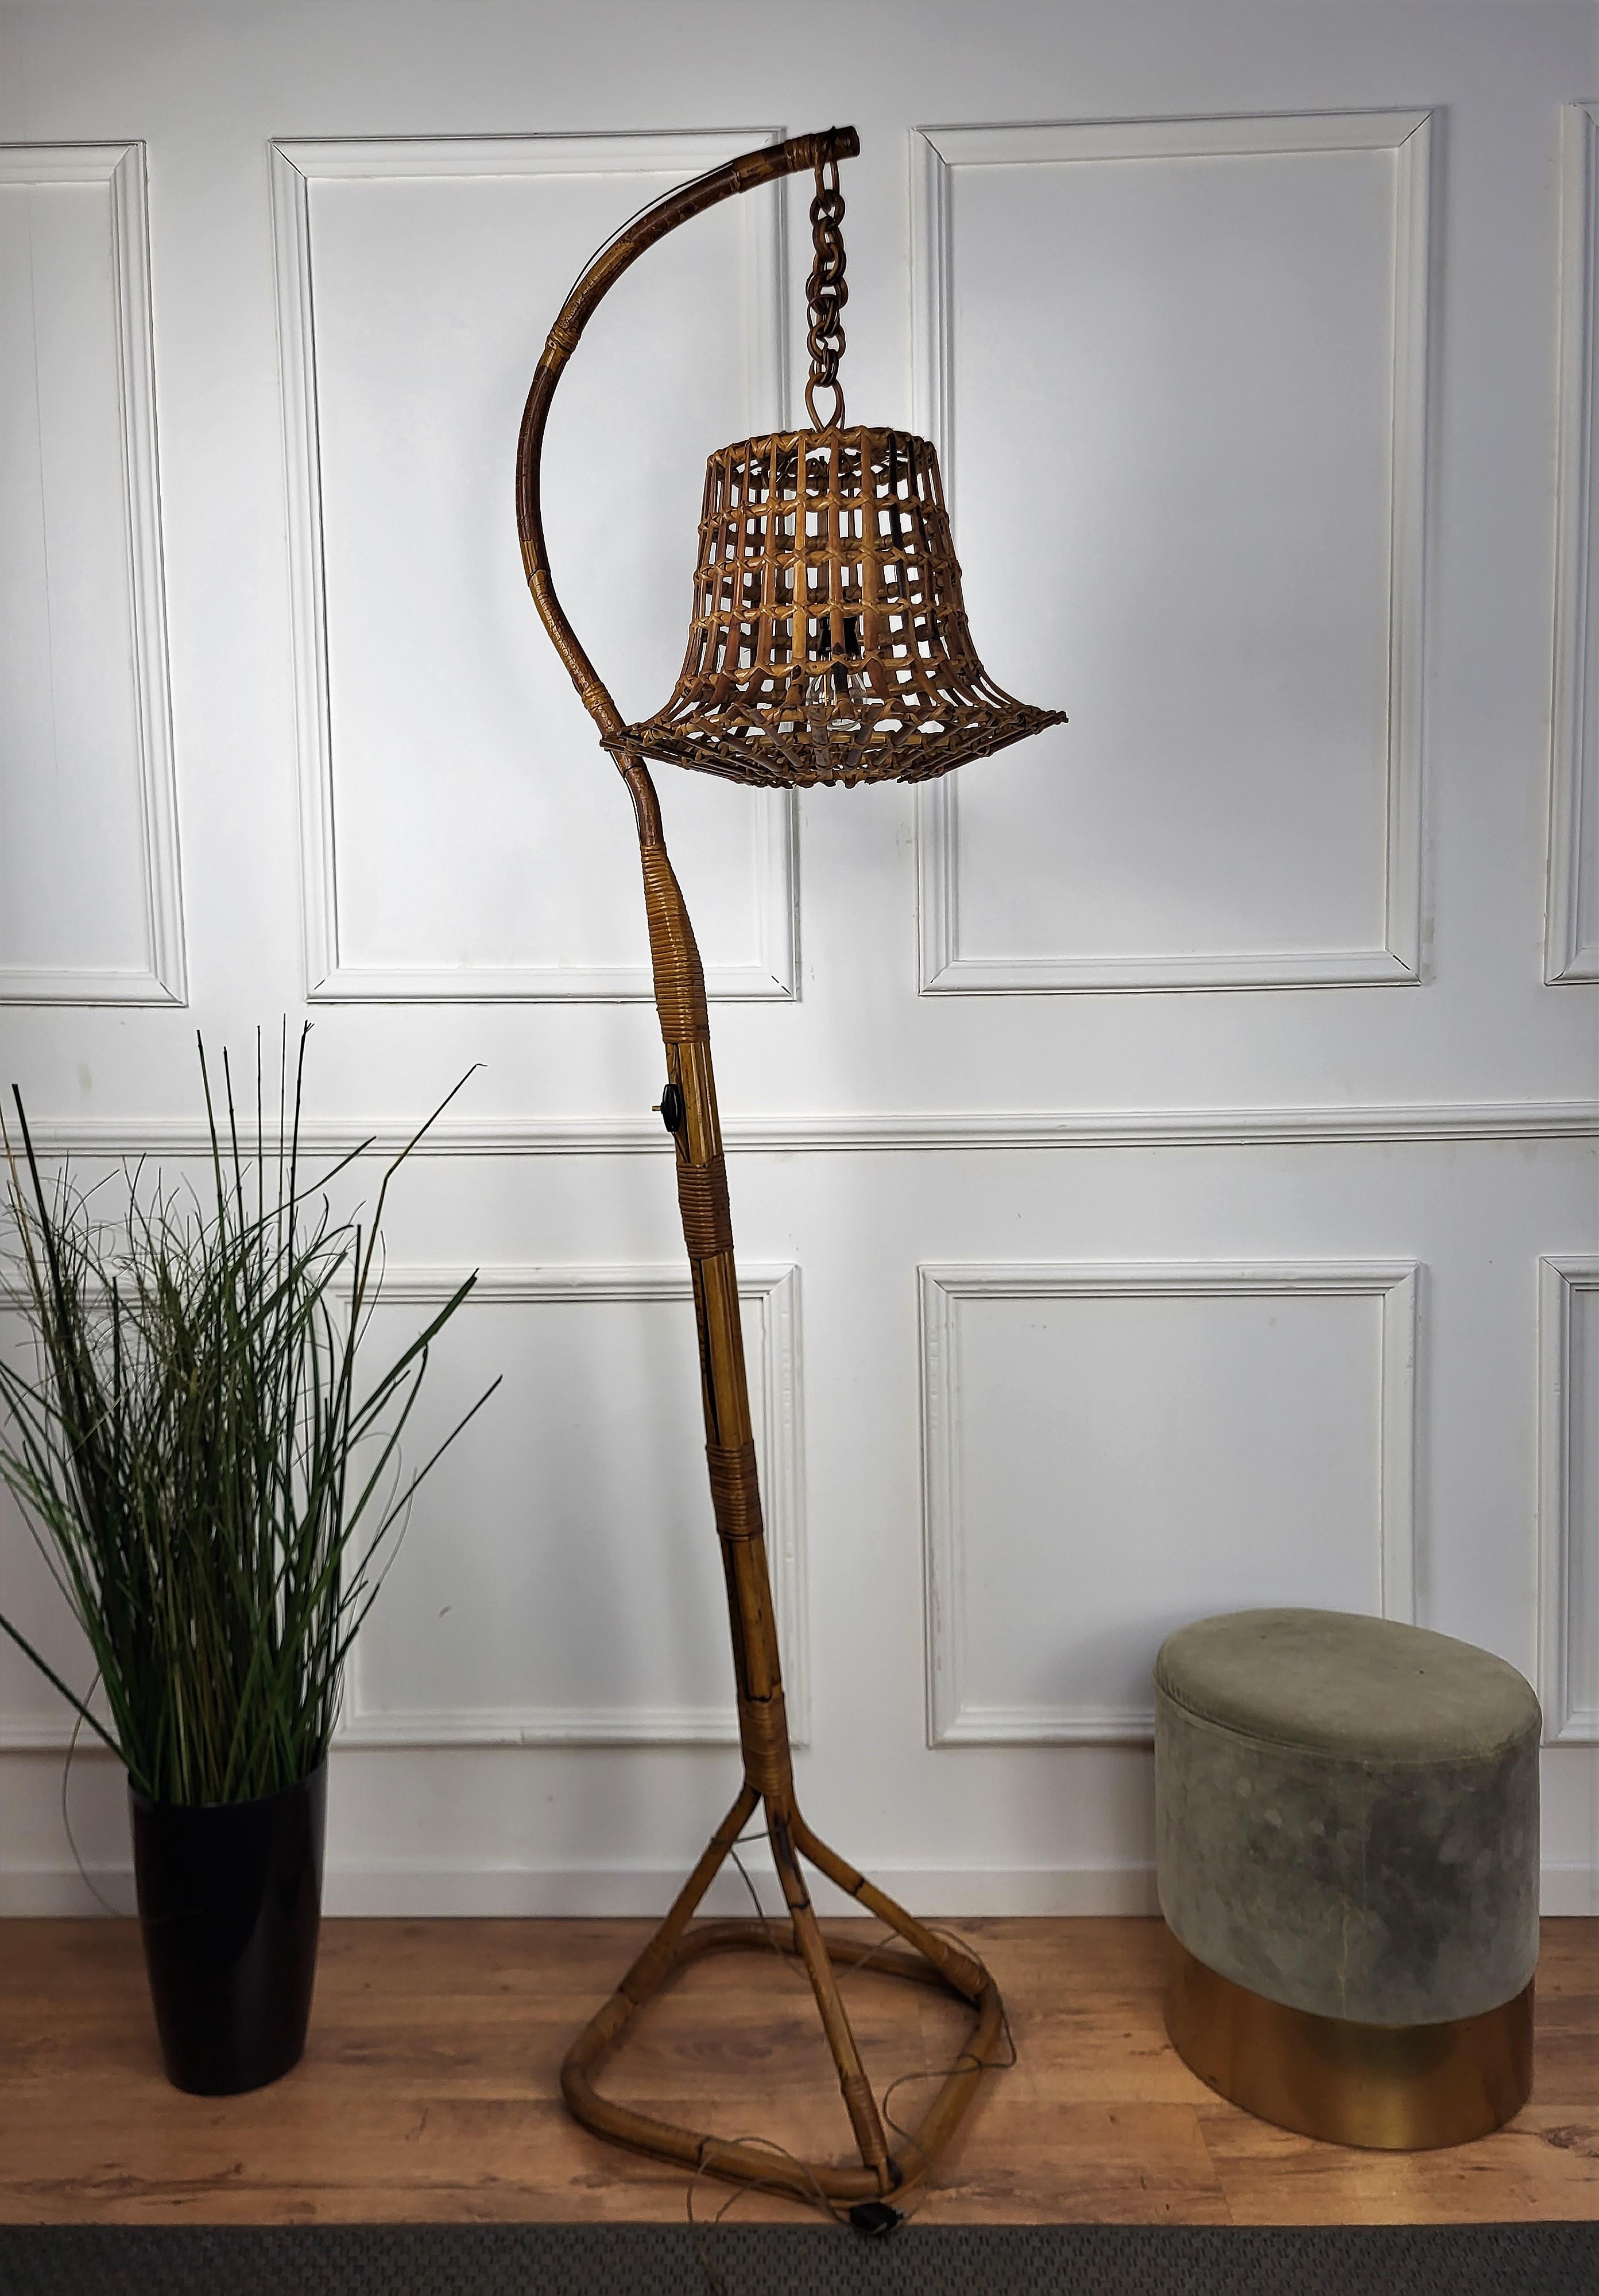 Beautiful 1960s Italian Mid-Century Modern floor lamp perfect in any room. Great design and manufacturing characterized by the hanging lantern. This charming piece is in the typical style of Bonacina, Audoux and Minet, Von Bohr where the organic